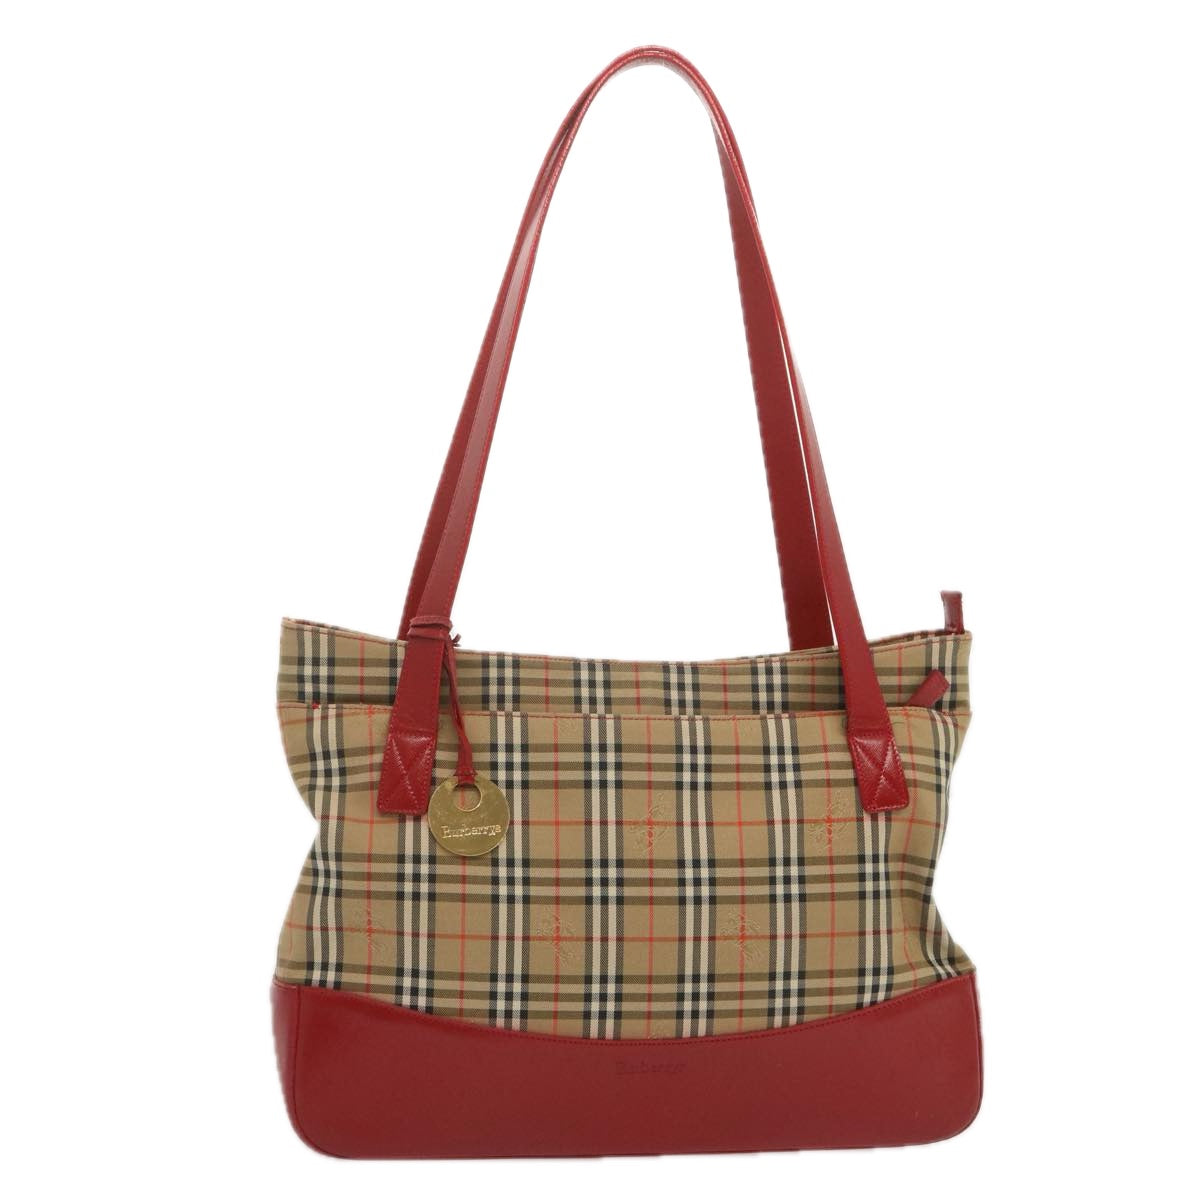 Burberrys Nova Check Tote Bag Canvas Beige Red Auth 68740